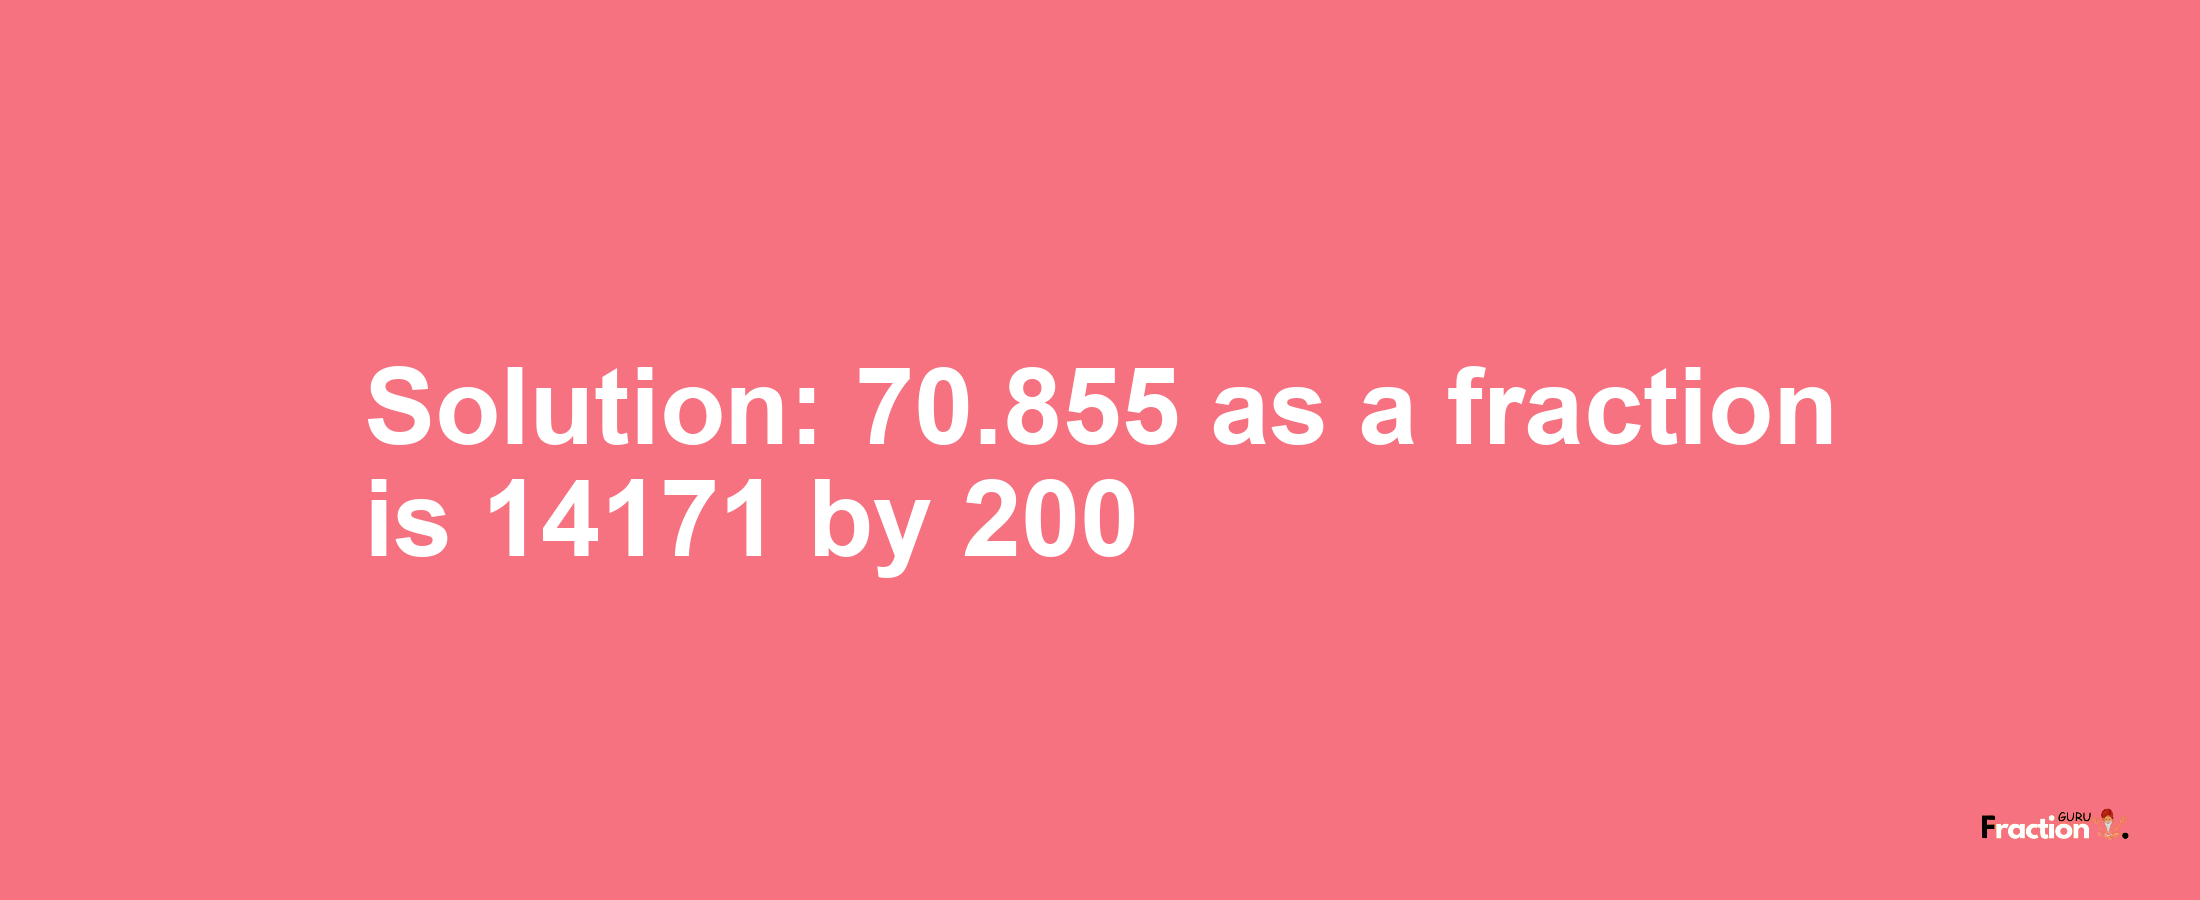 Solution:70.855 as a fraction is 14171/200